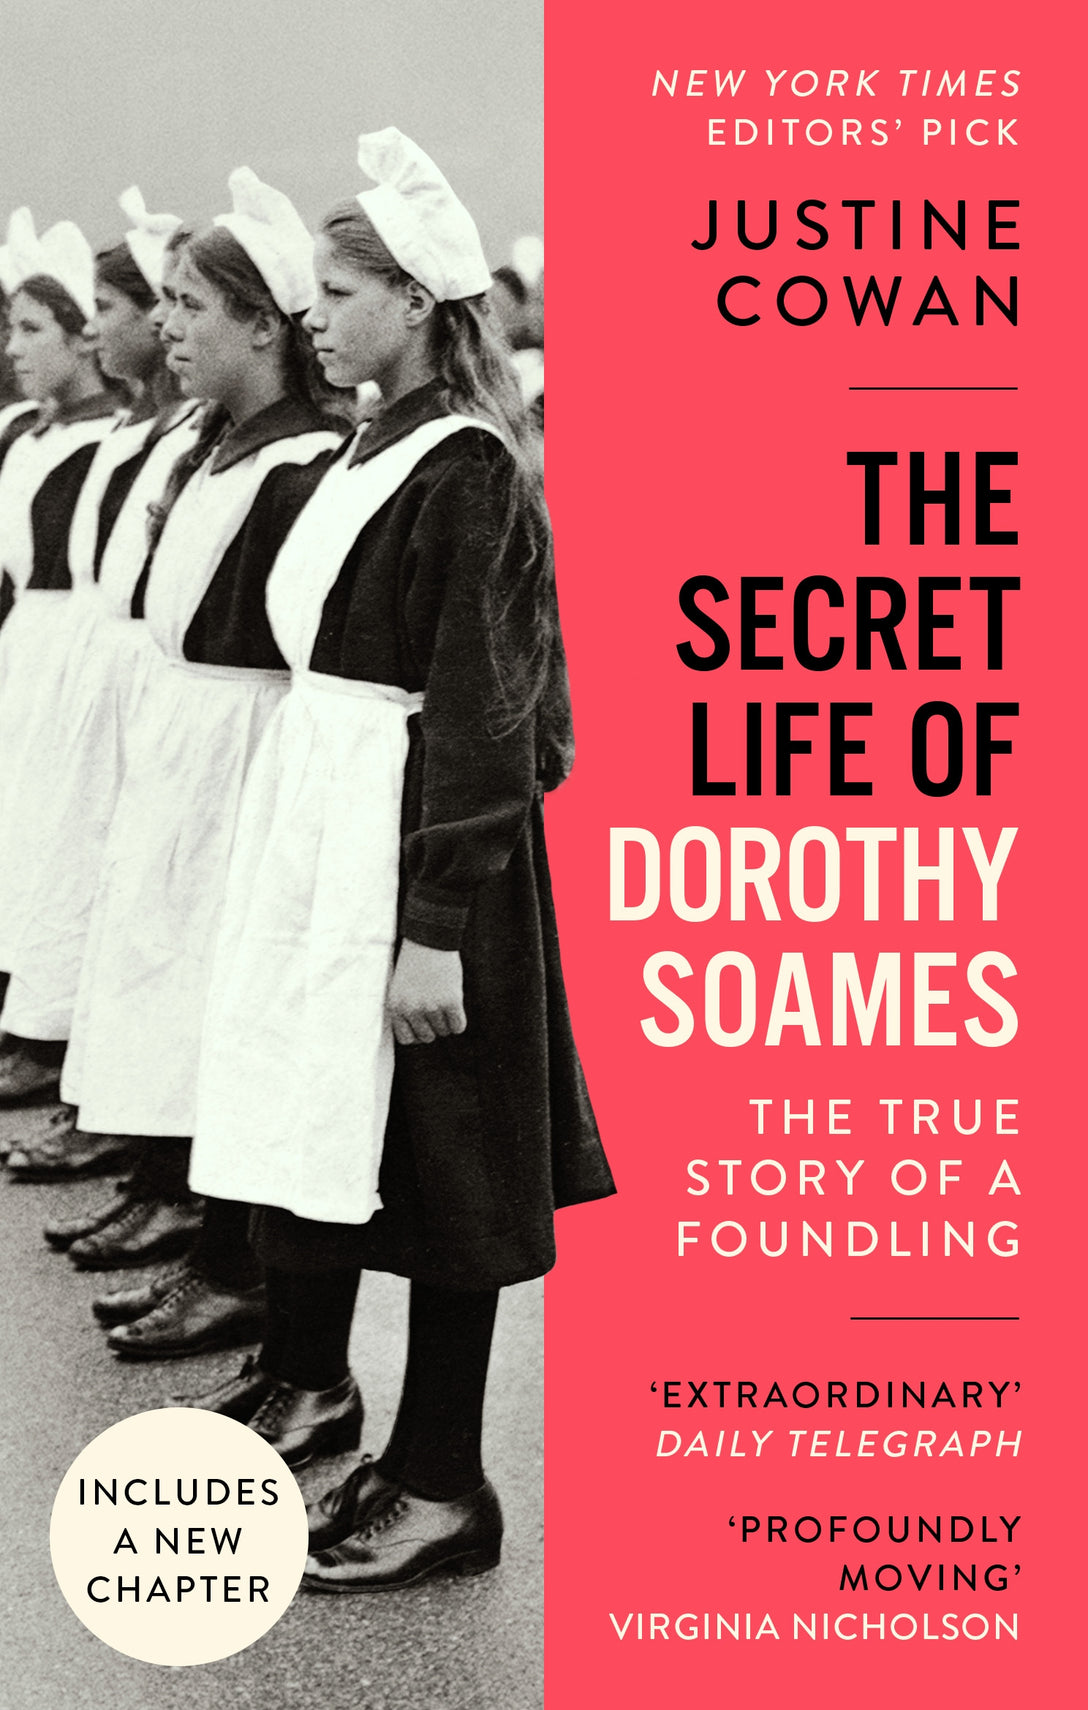 The Secret Life of Dorothy Soames by Justine Cowan